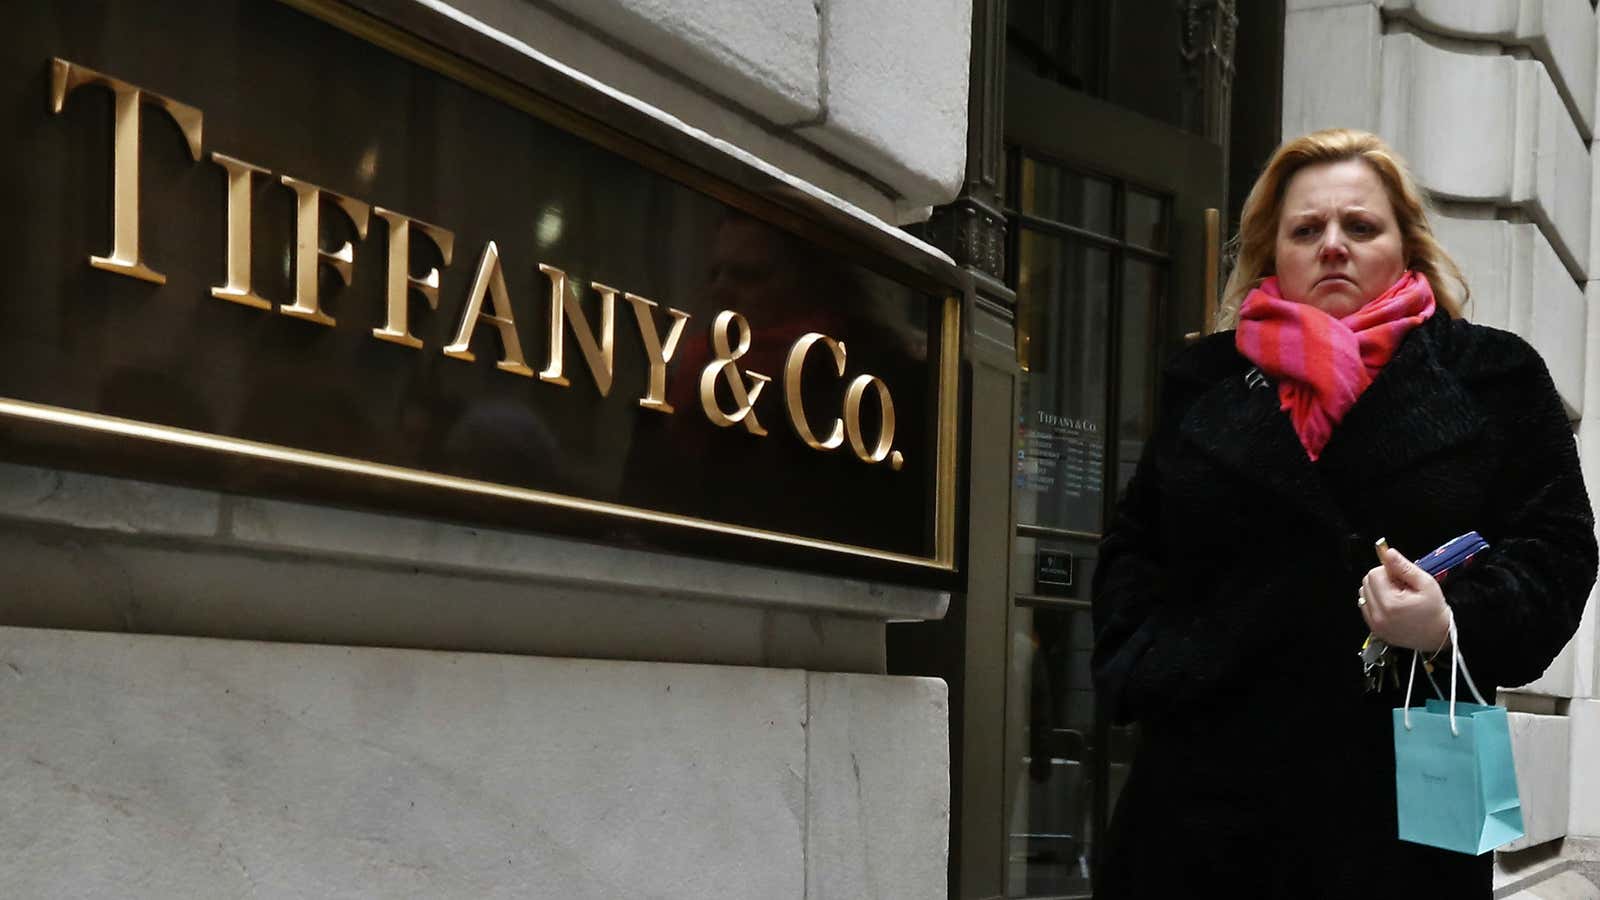 Tiffany has pegged its sour US sales on the dollar.